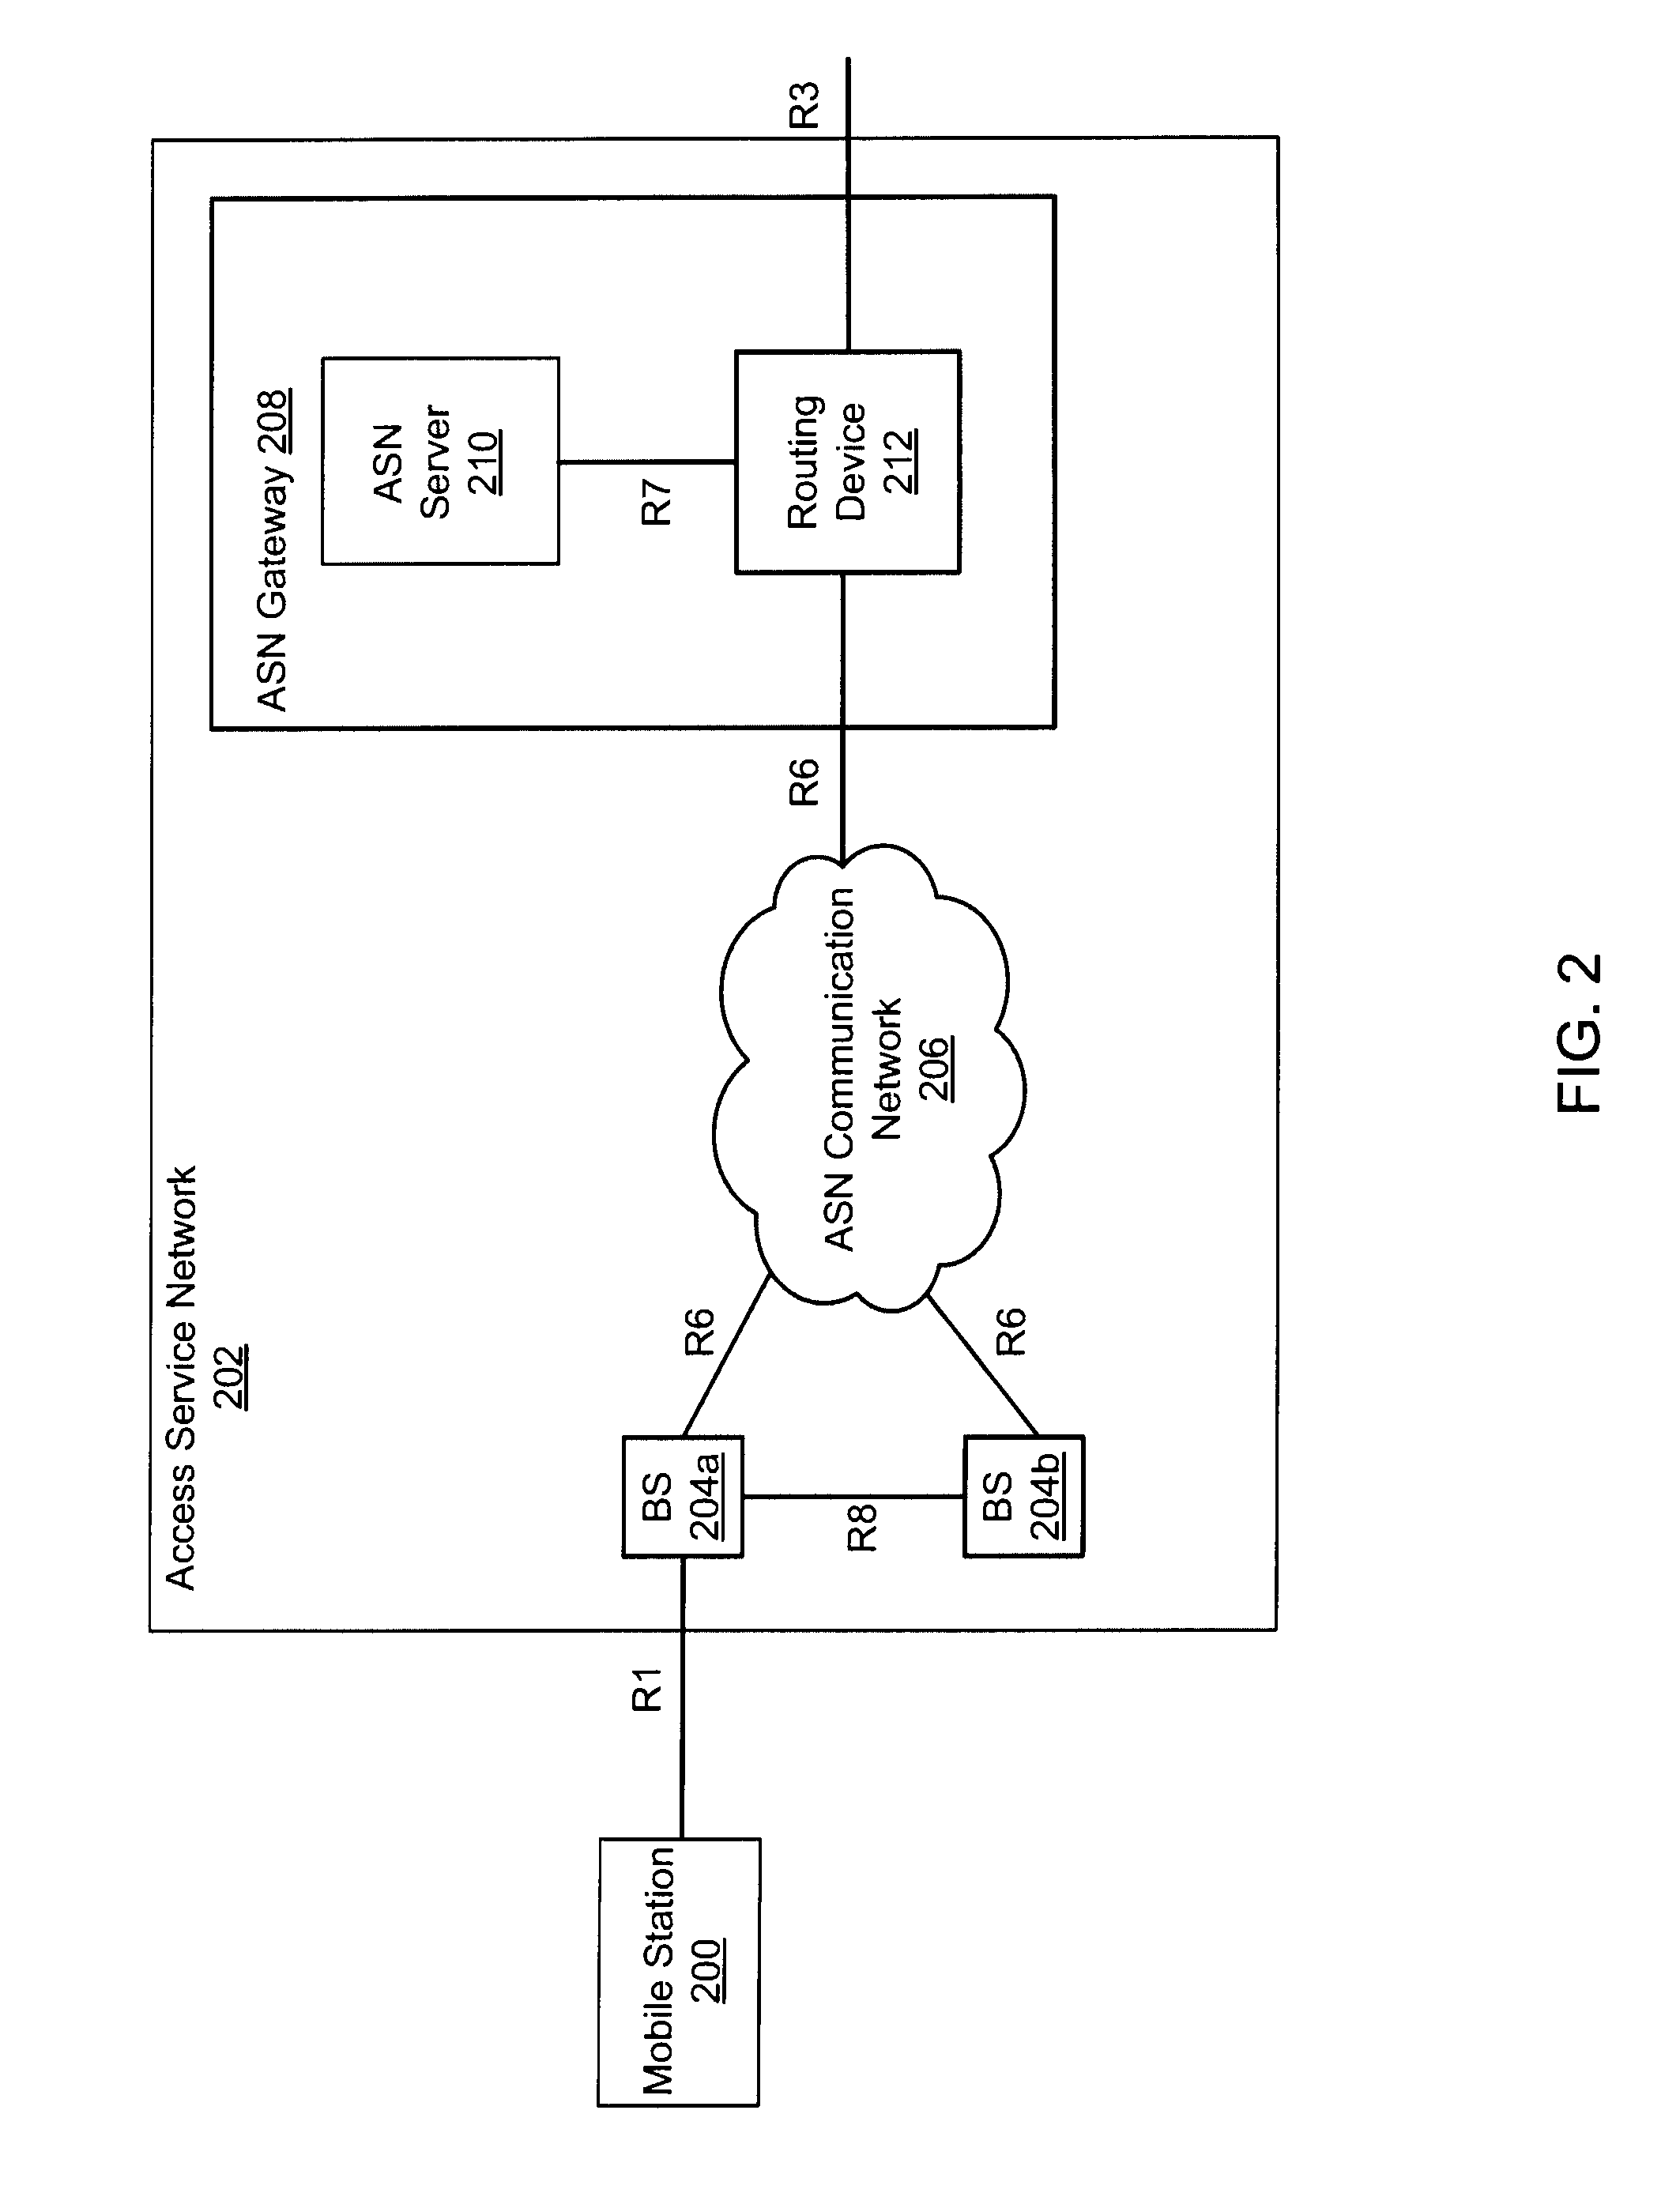 Systems and methods for fractional routing redundancy